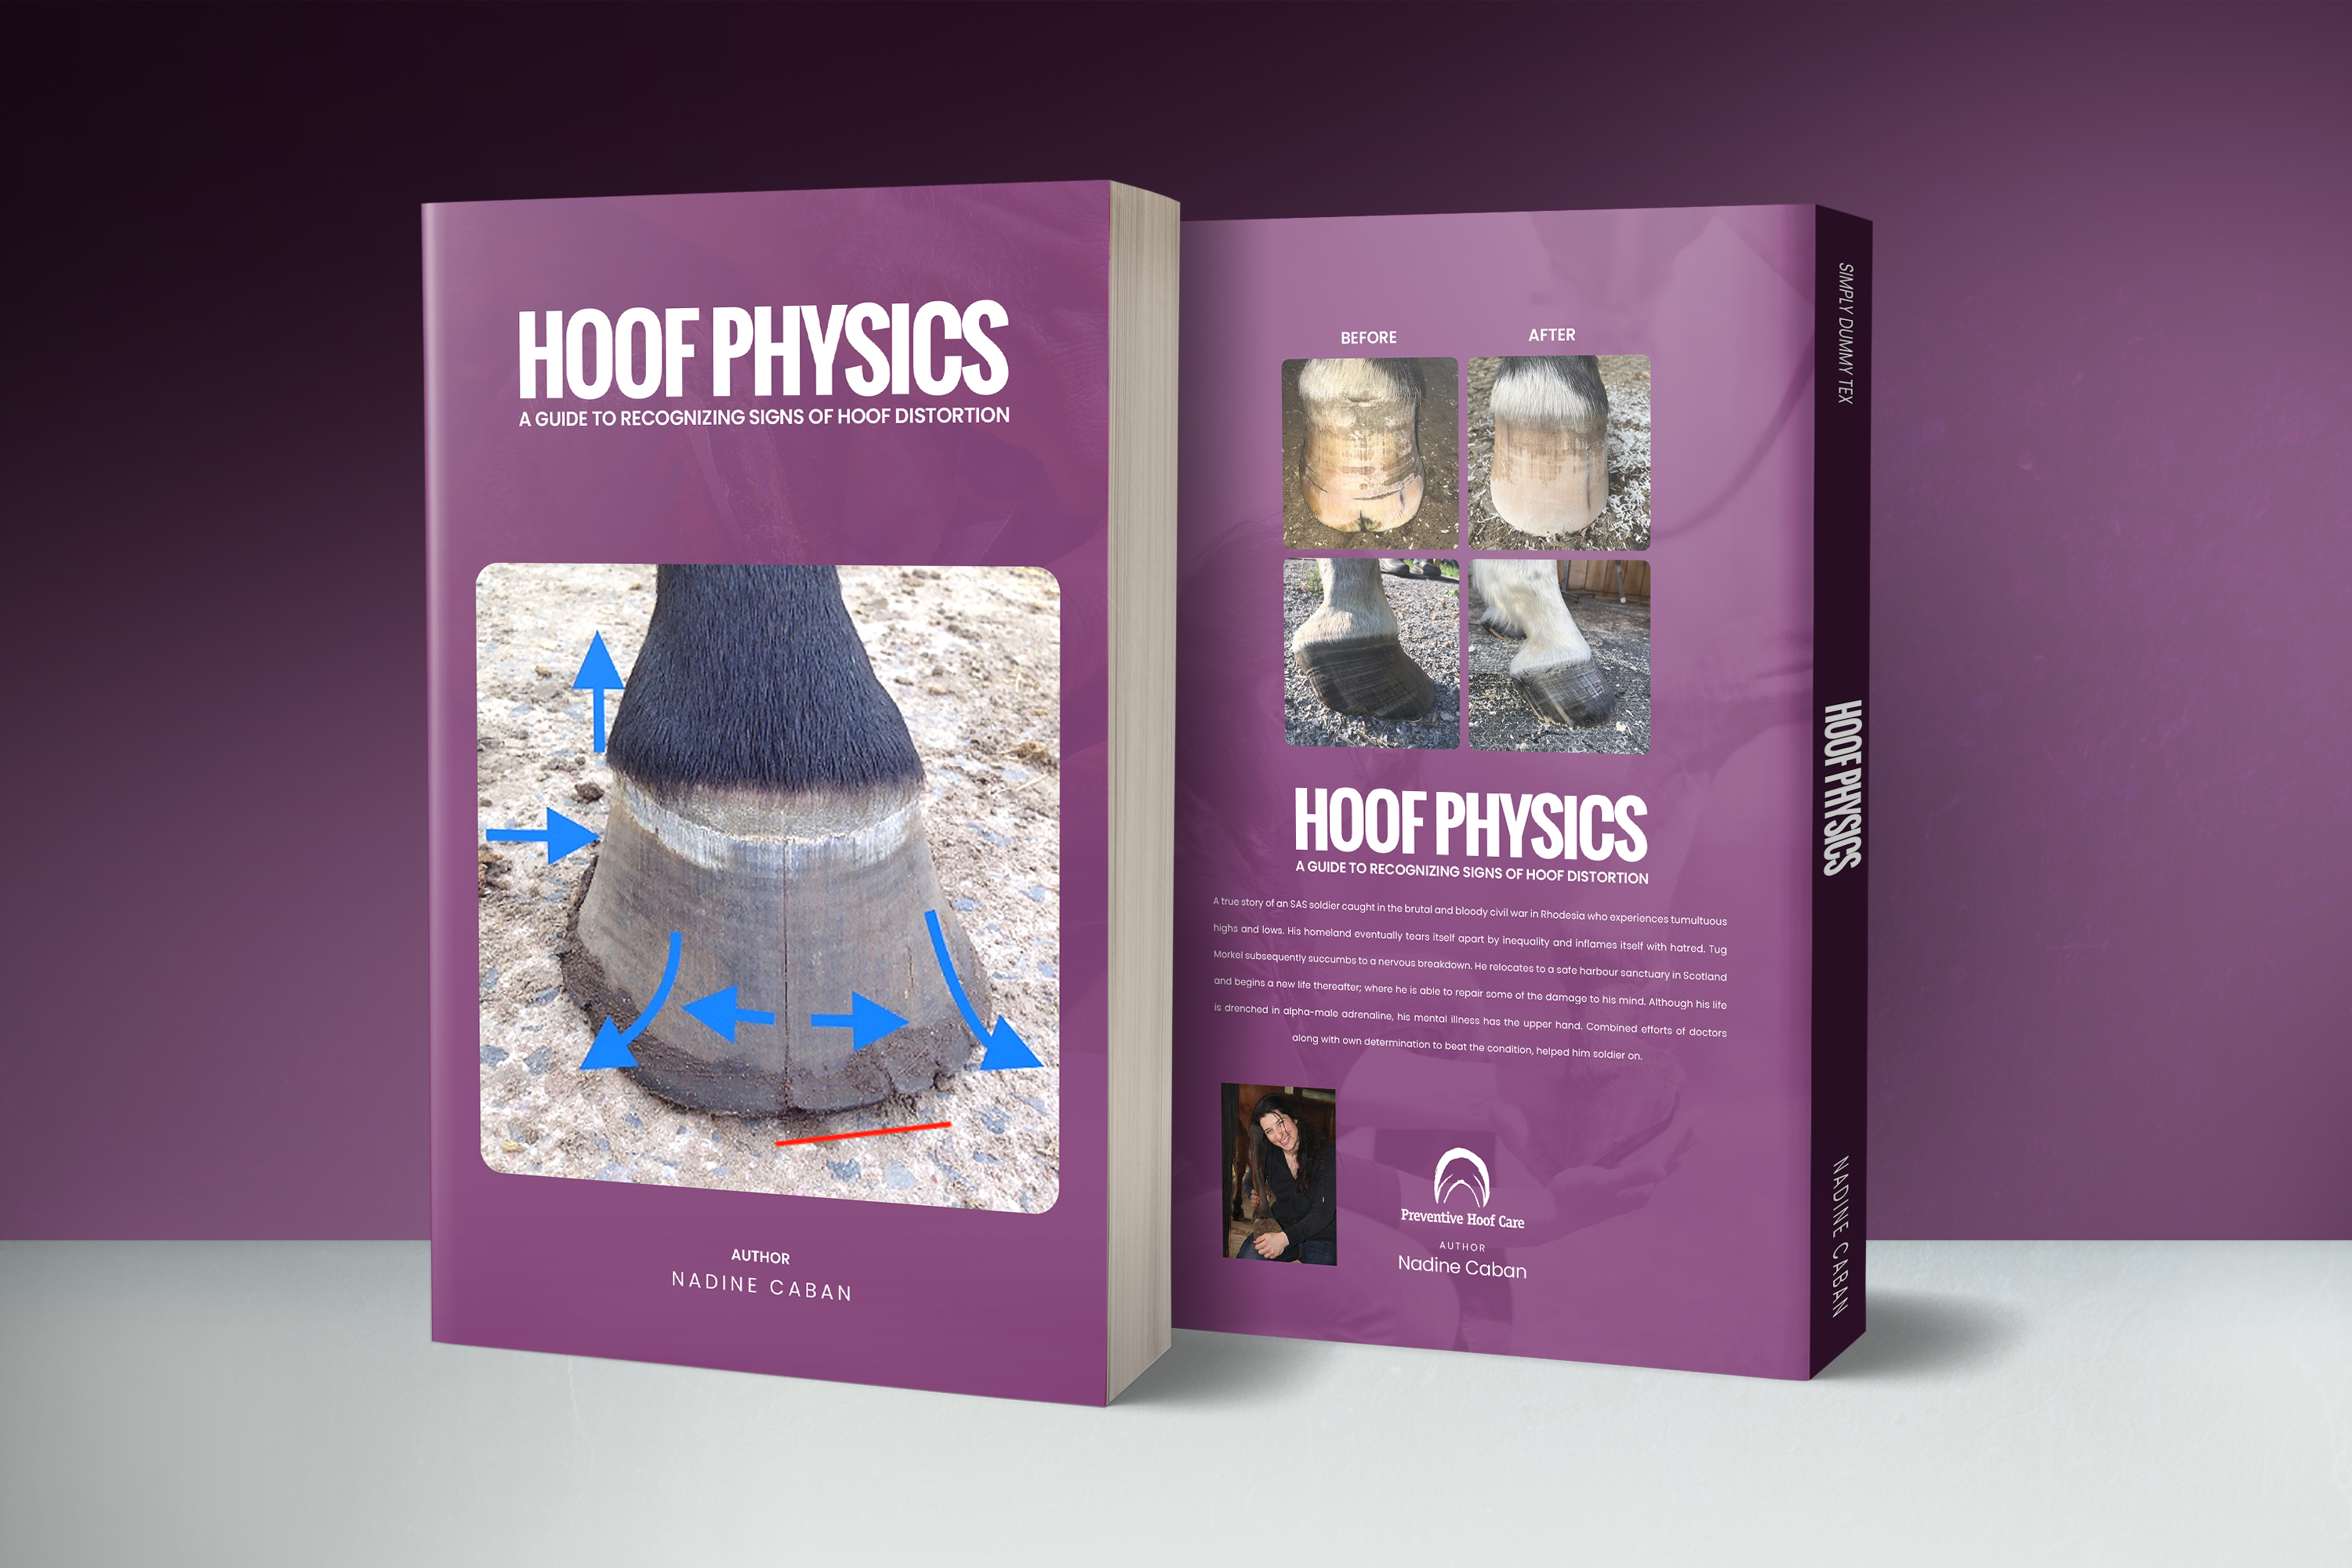 Hoof Physics: A self-published book by Nadine Caban